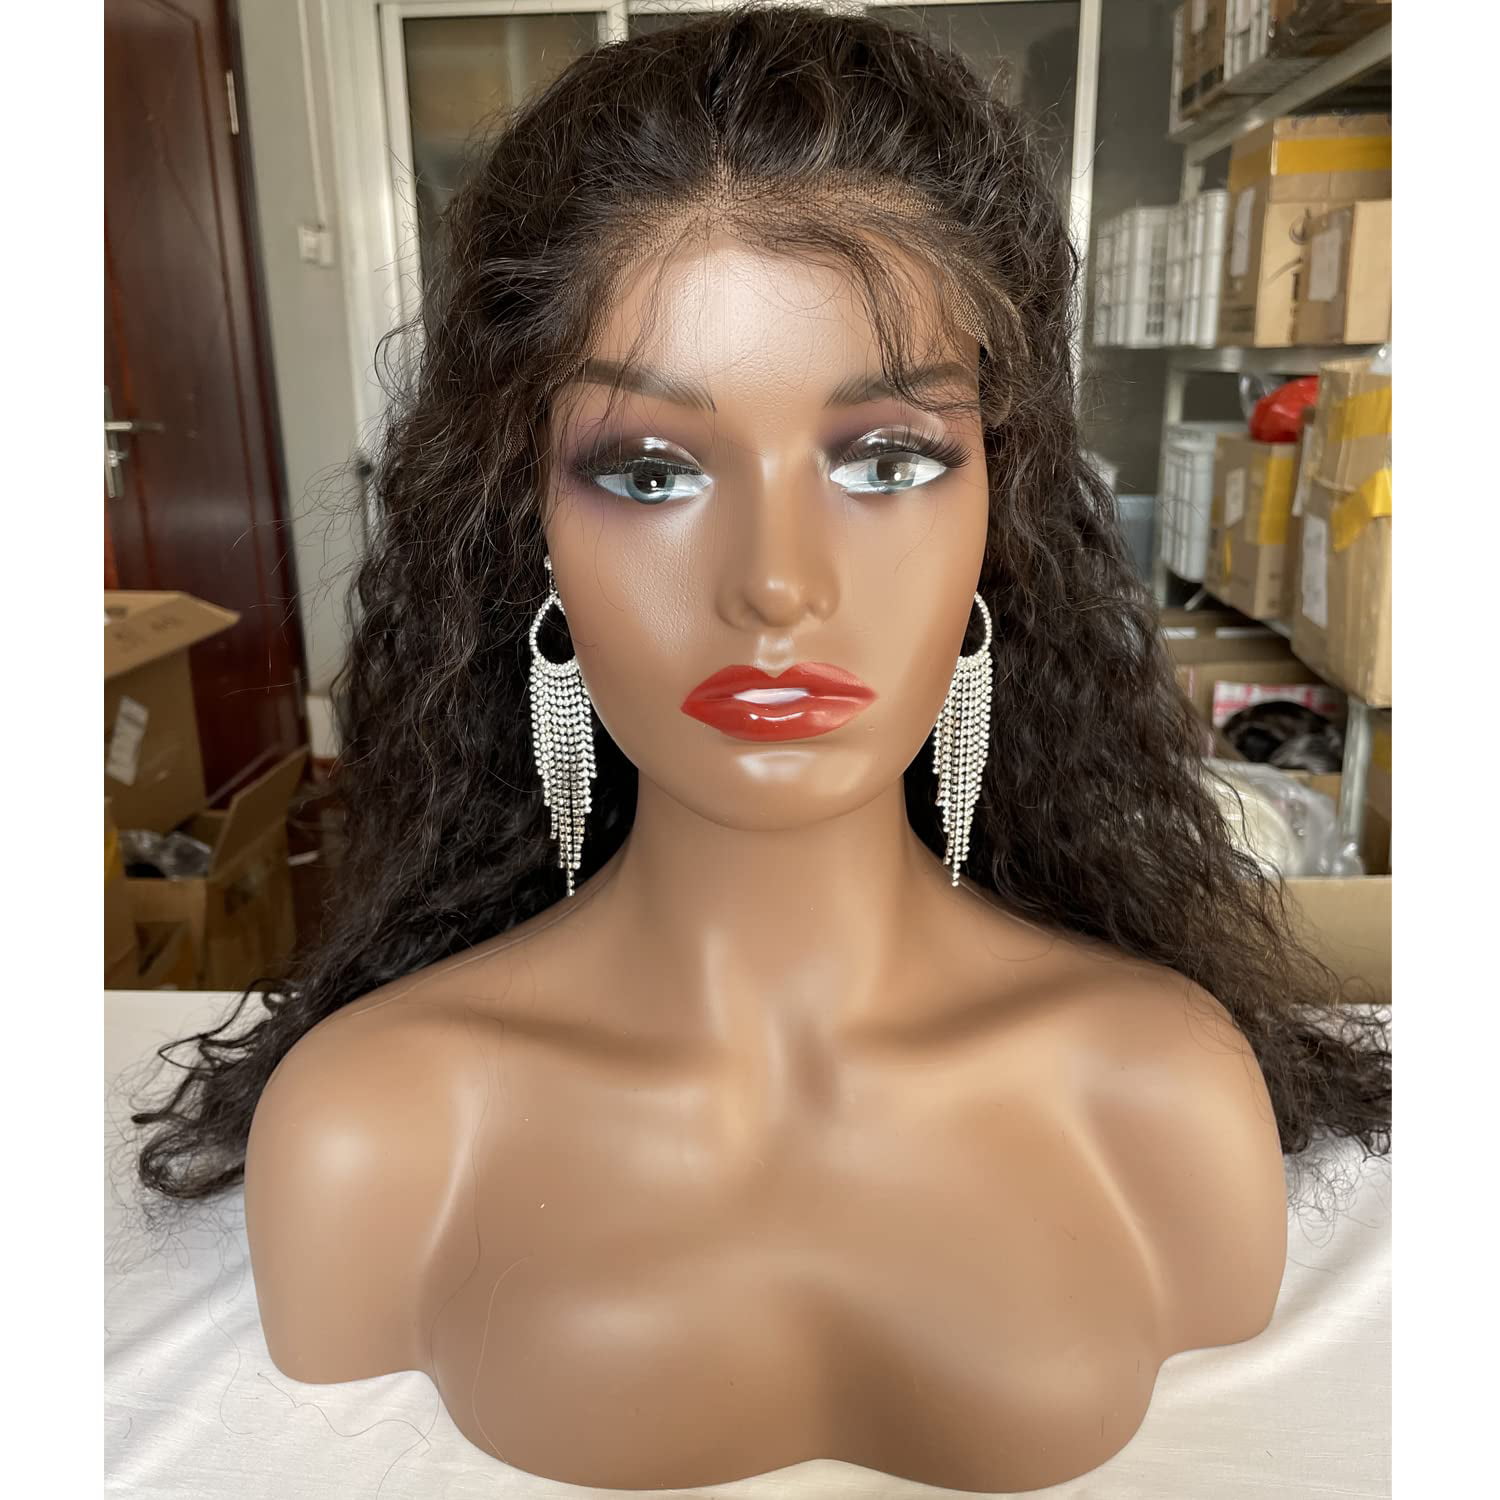  Realistic Female Mannequin Head with Shoulder for